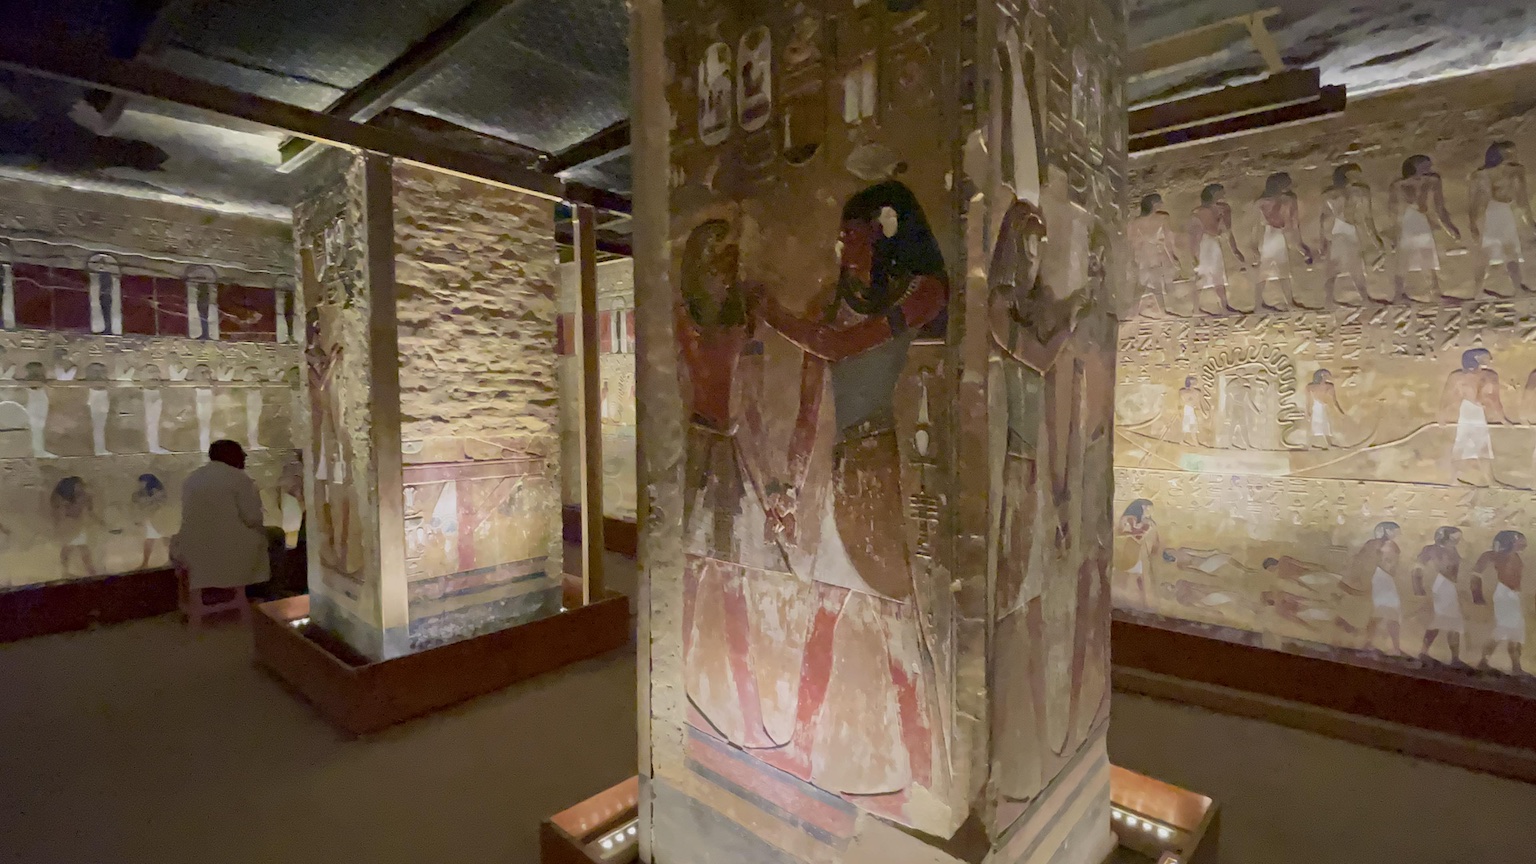 Conservation efforts in the Tomb of Ramses IX in the Kings Valley